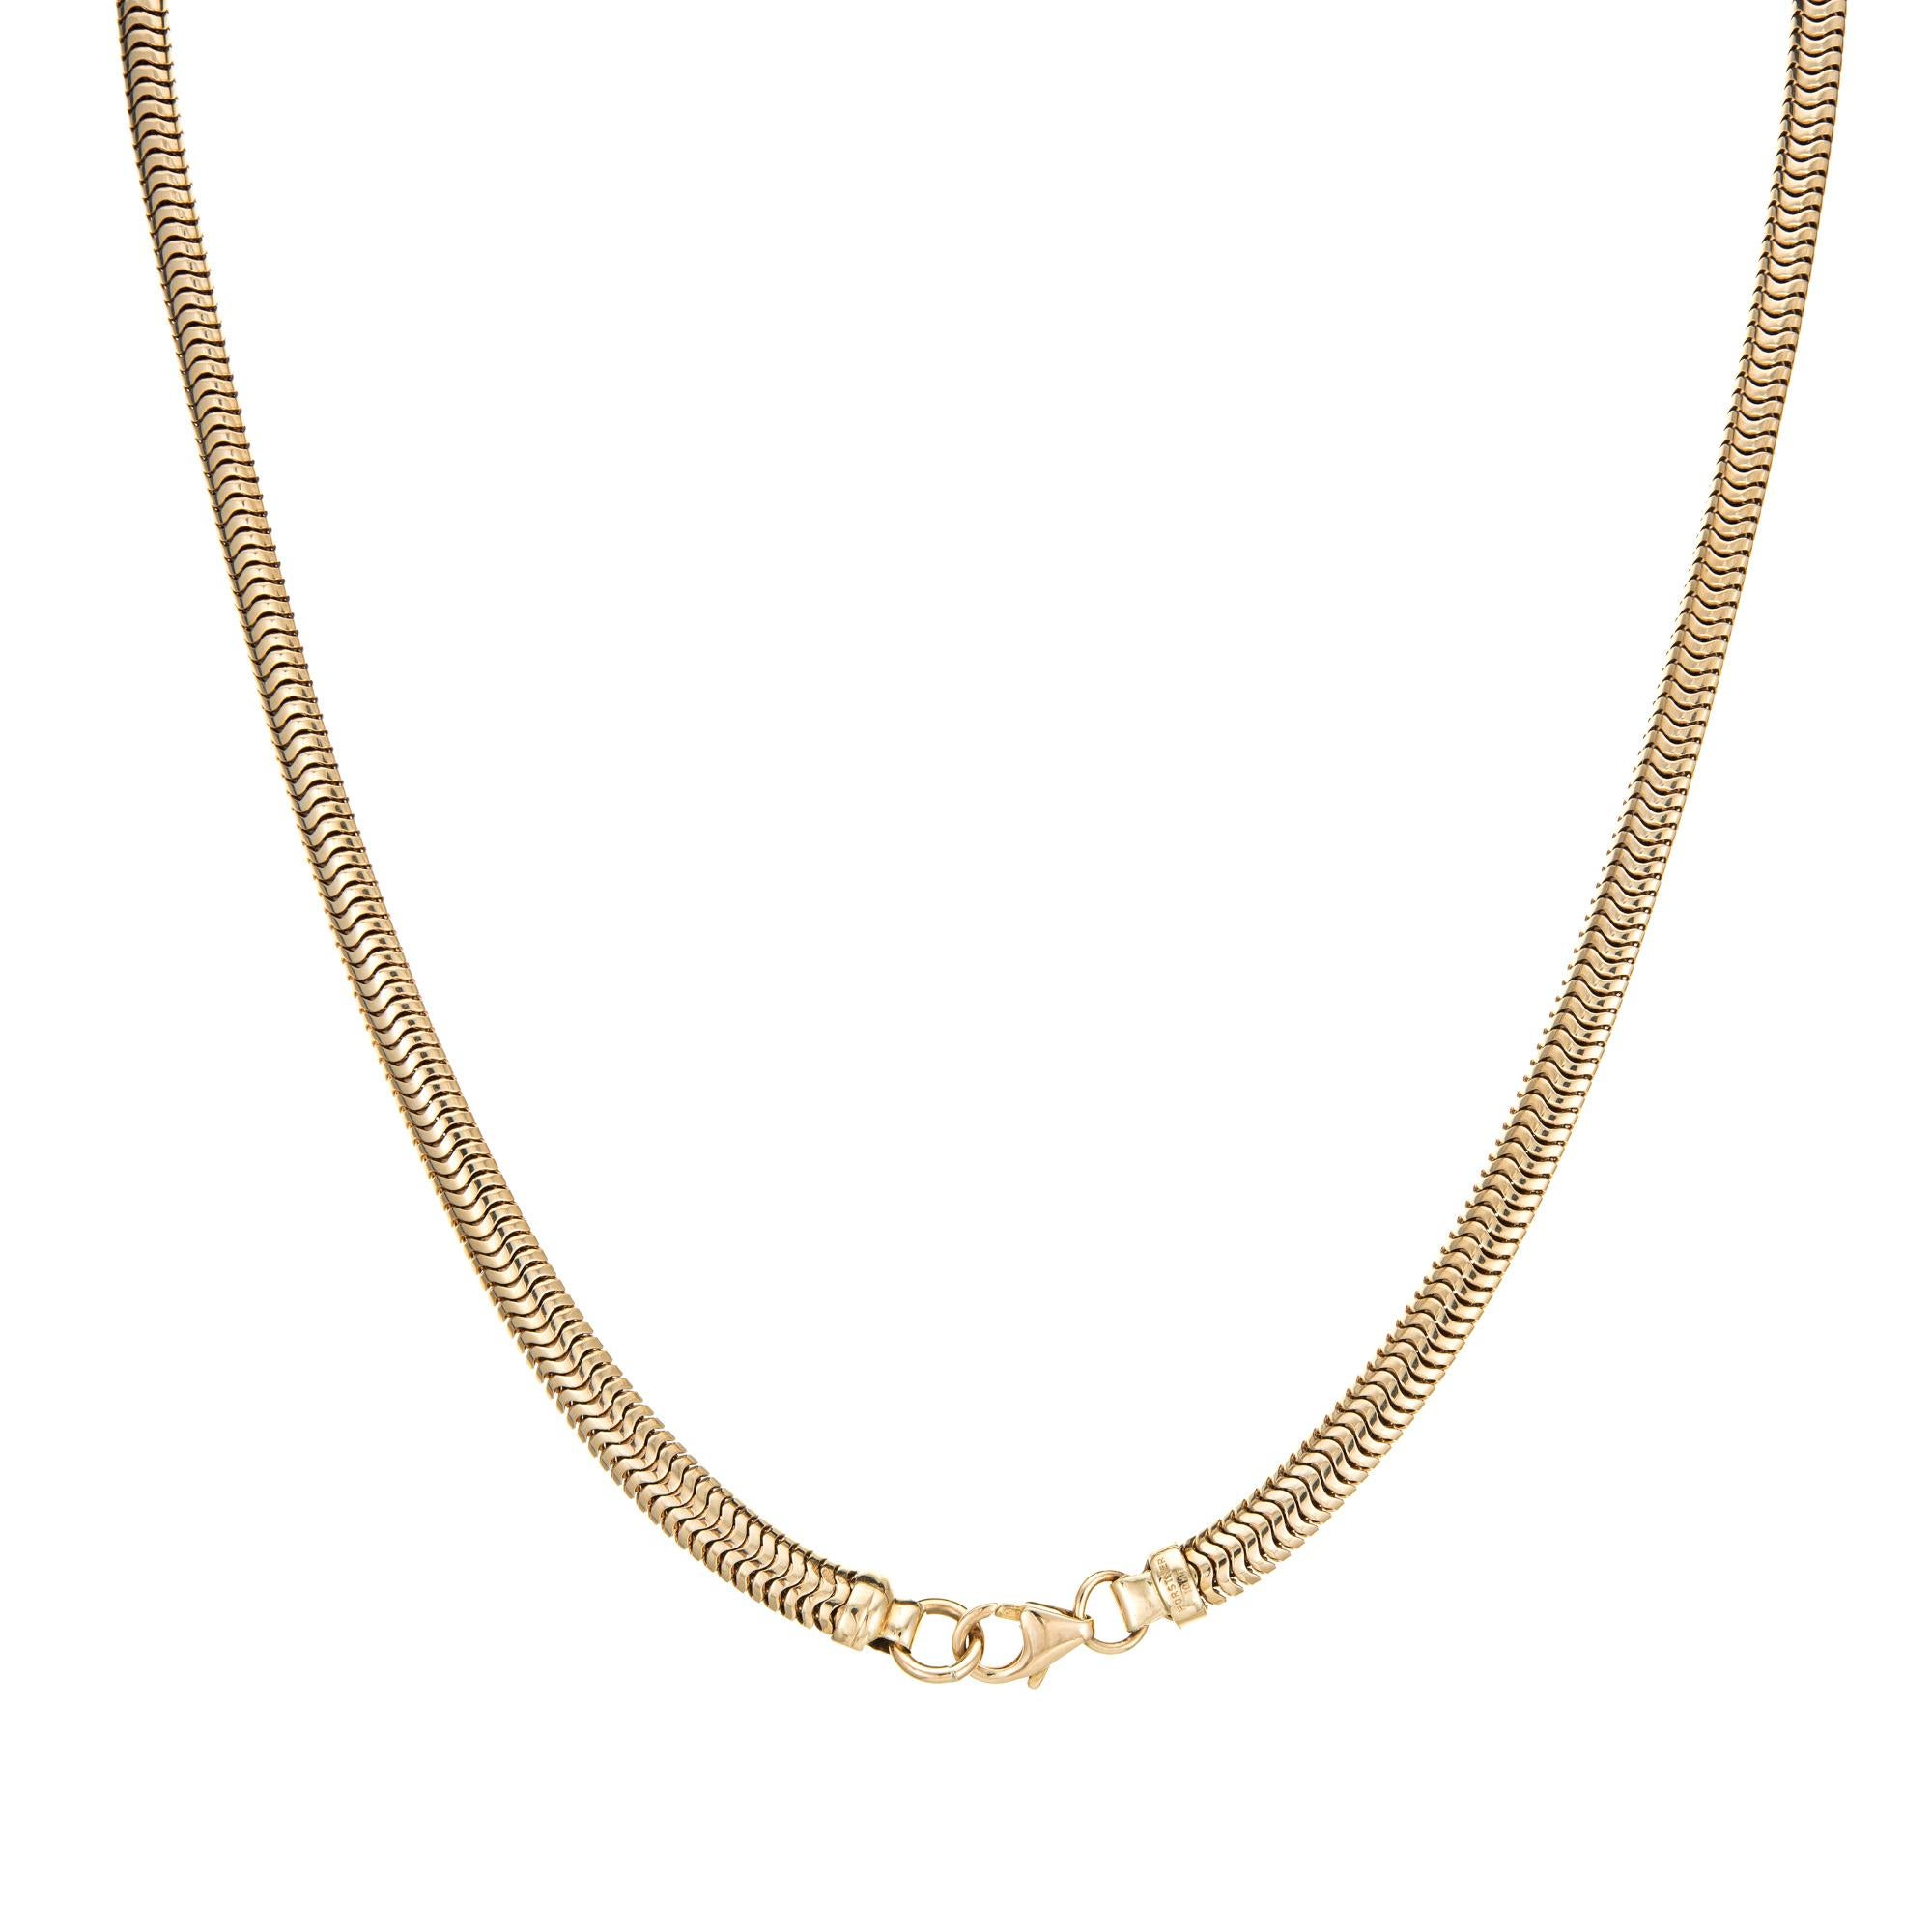 Stylish retro vintage snake chain crafted in 10 karat yellow gold (circa 1940s to 1950s). 

The stylish snake chain is supple to the touch and moves easily. Measuring 5mm wide the chain makes a nice statement and sits at the nape of the neck. The